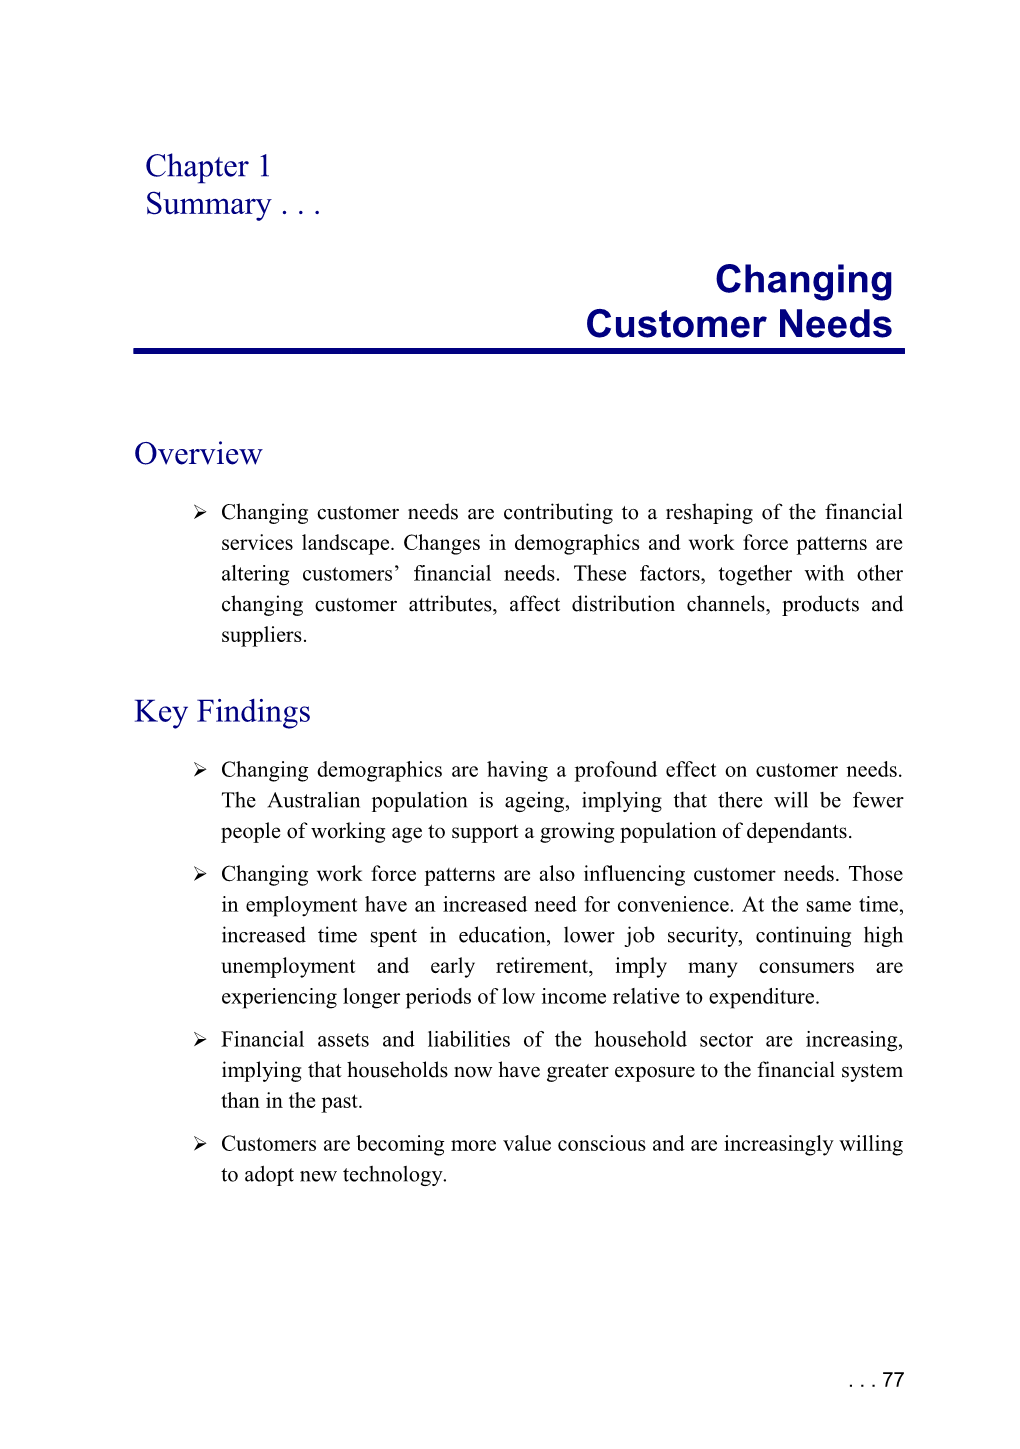 Finacial System Inquiry (Wallis Report) - Changing Customer Needs